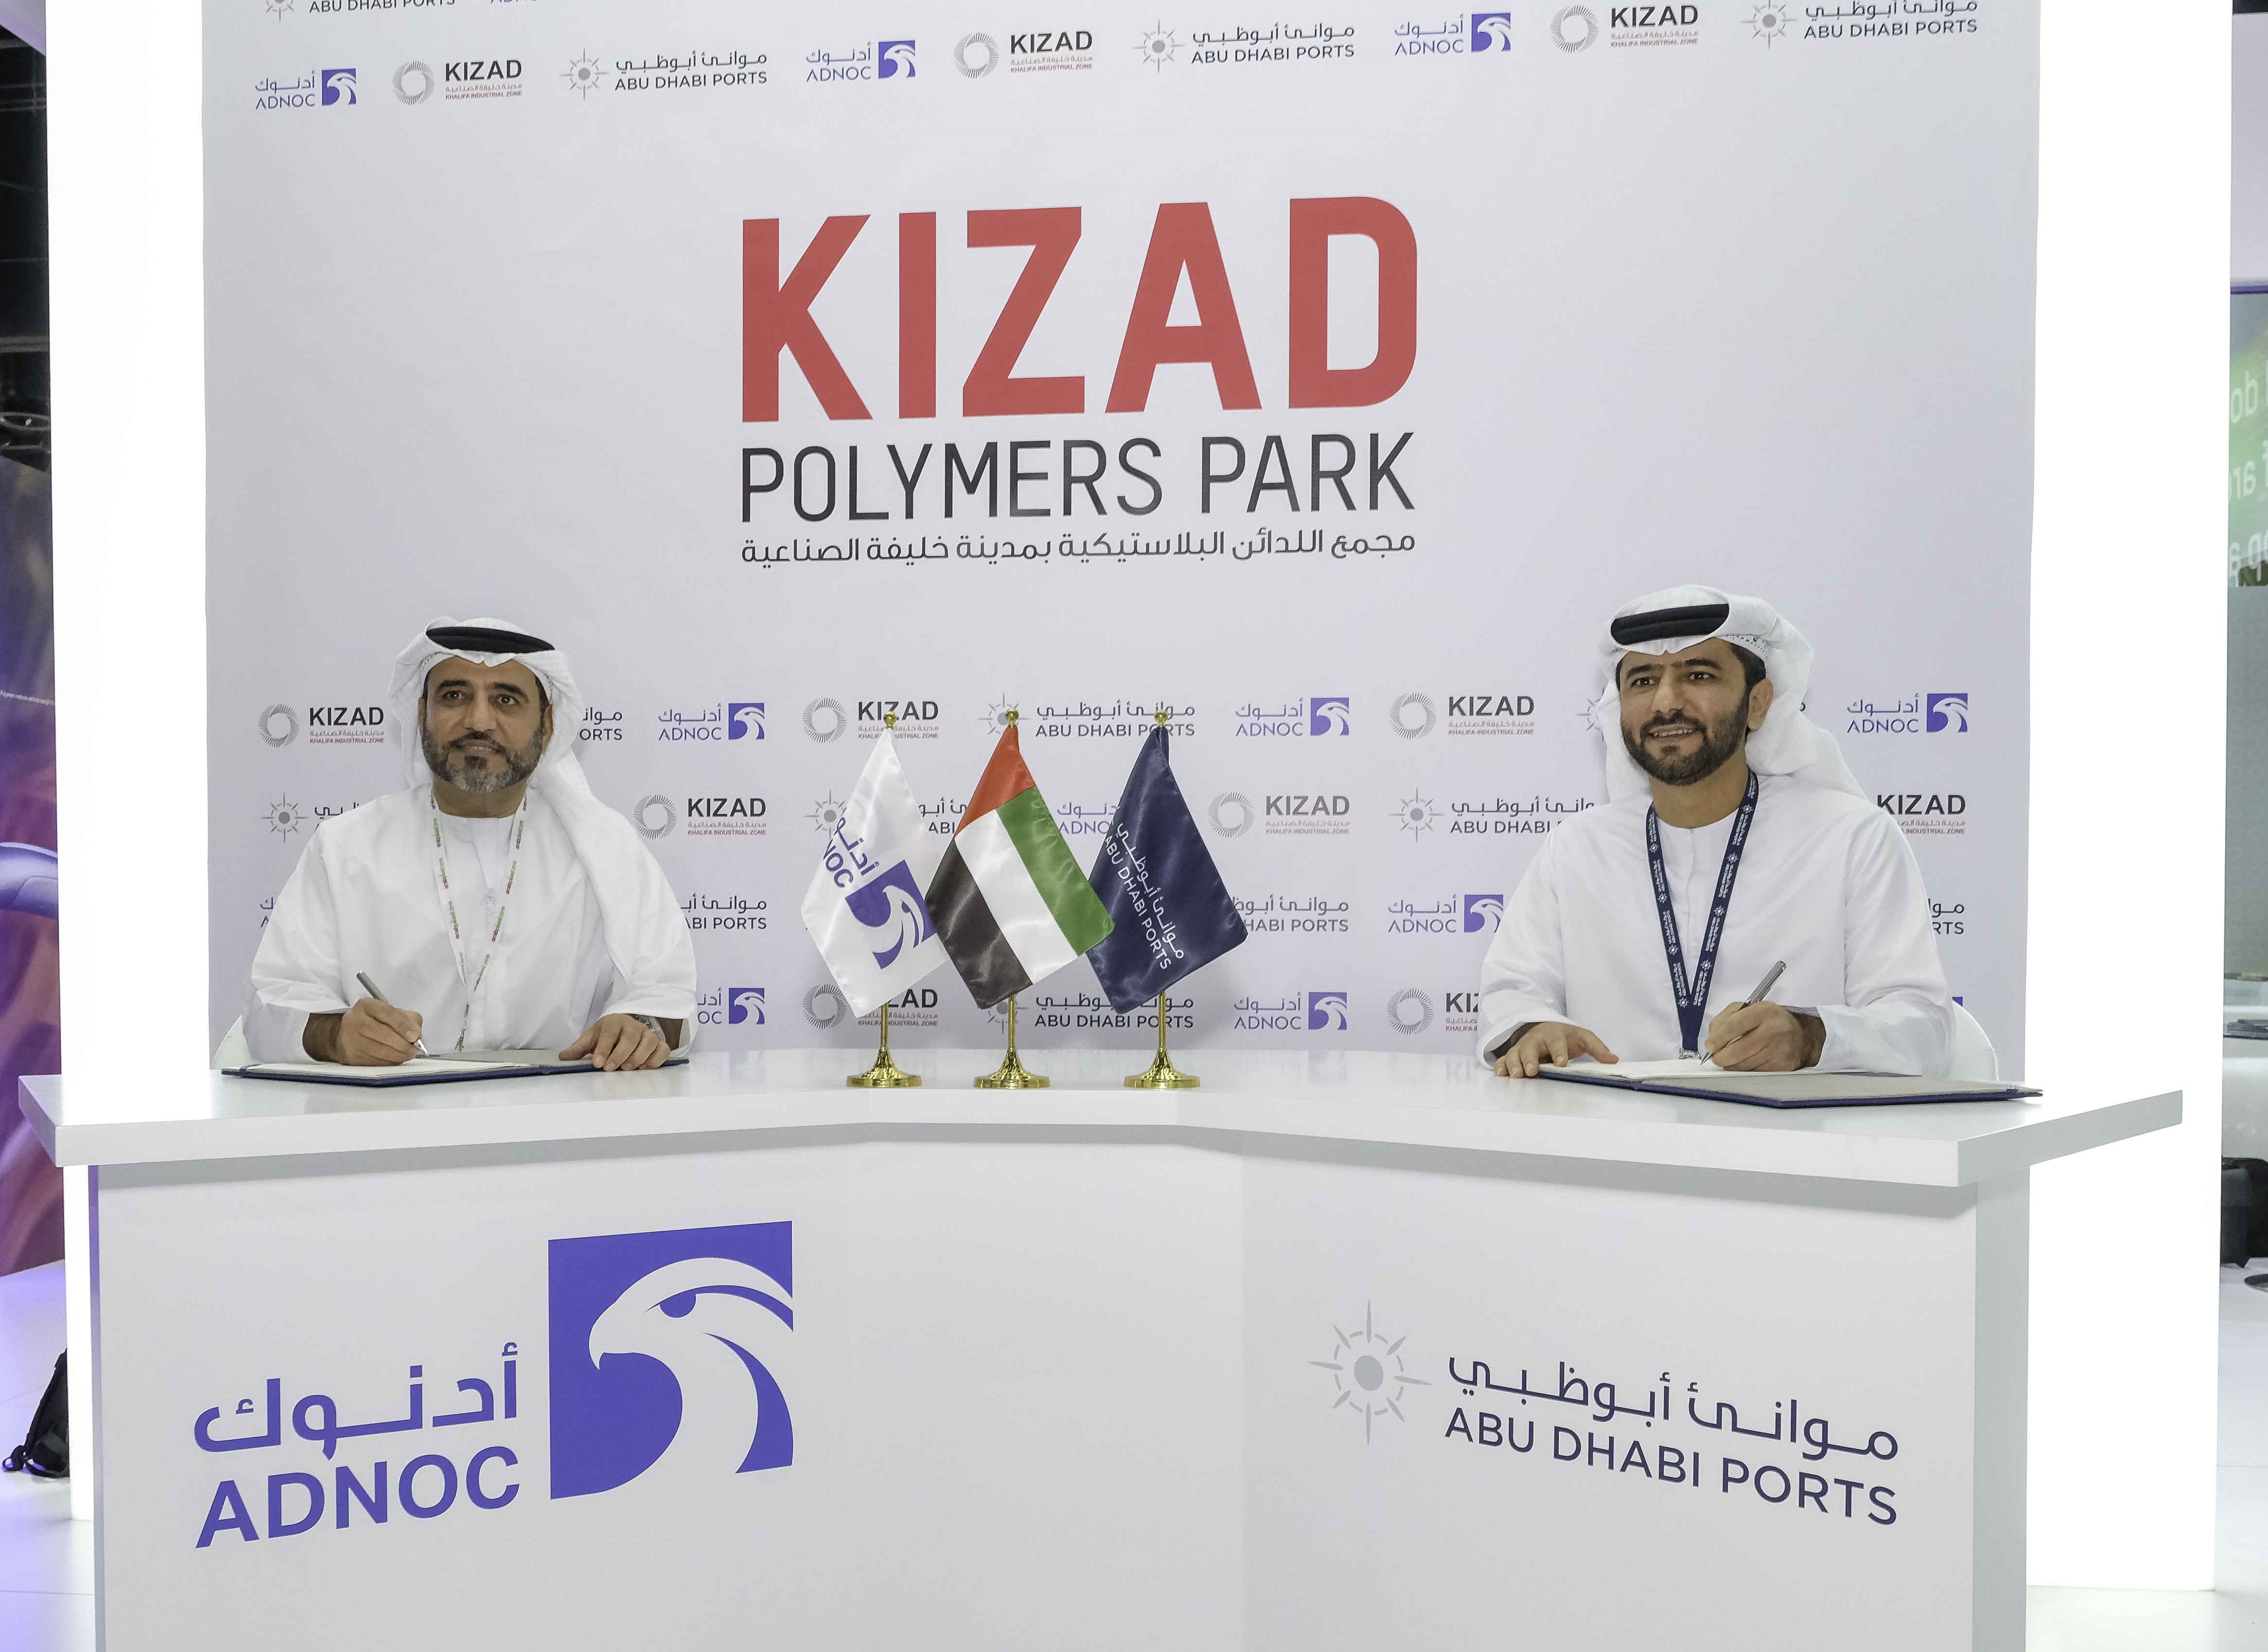 Captain Mohammed Juma-Shamsi, Chief Executive Officer of Abu Dhabi Ports, and Mr. Abdul Aziz Al-Hajri, Director of Gas, Refining and Petrochemicals at the grand opening of the KIZAD Polymers Plant. Photo via KIZAD